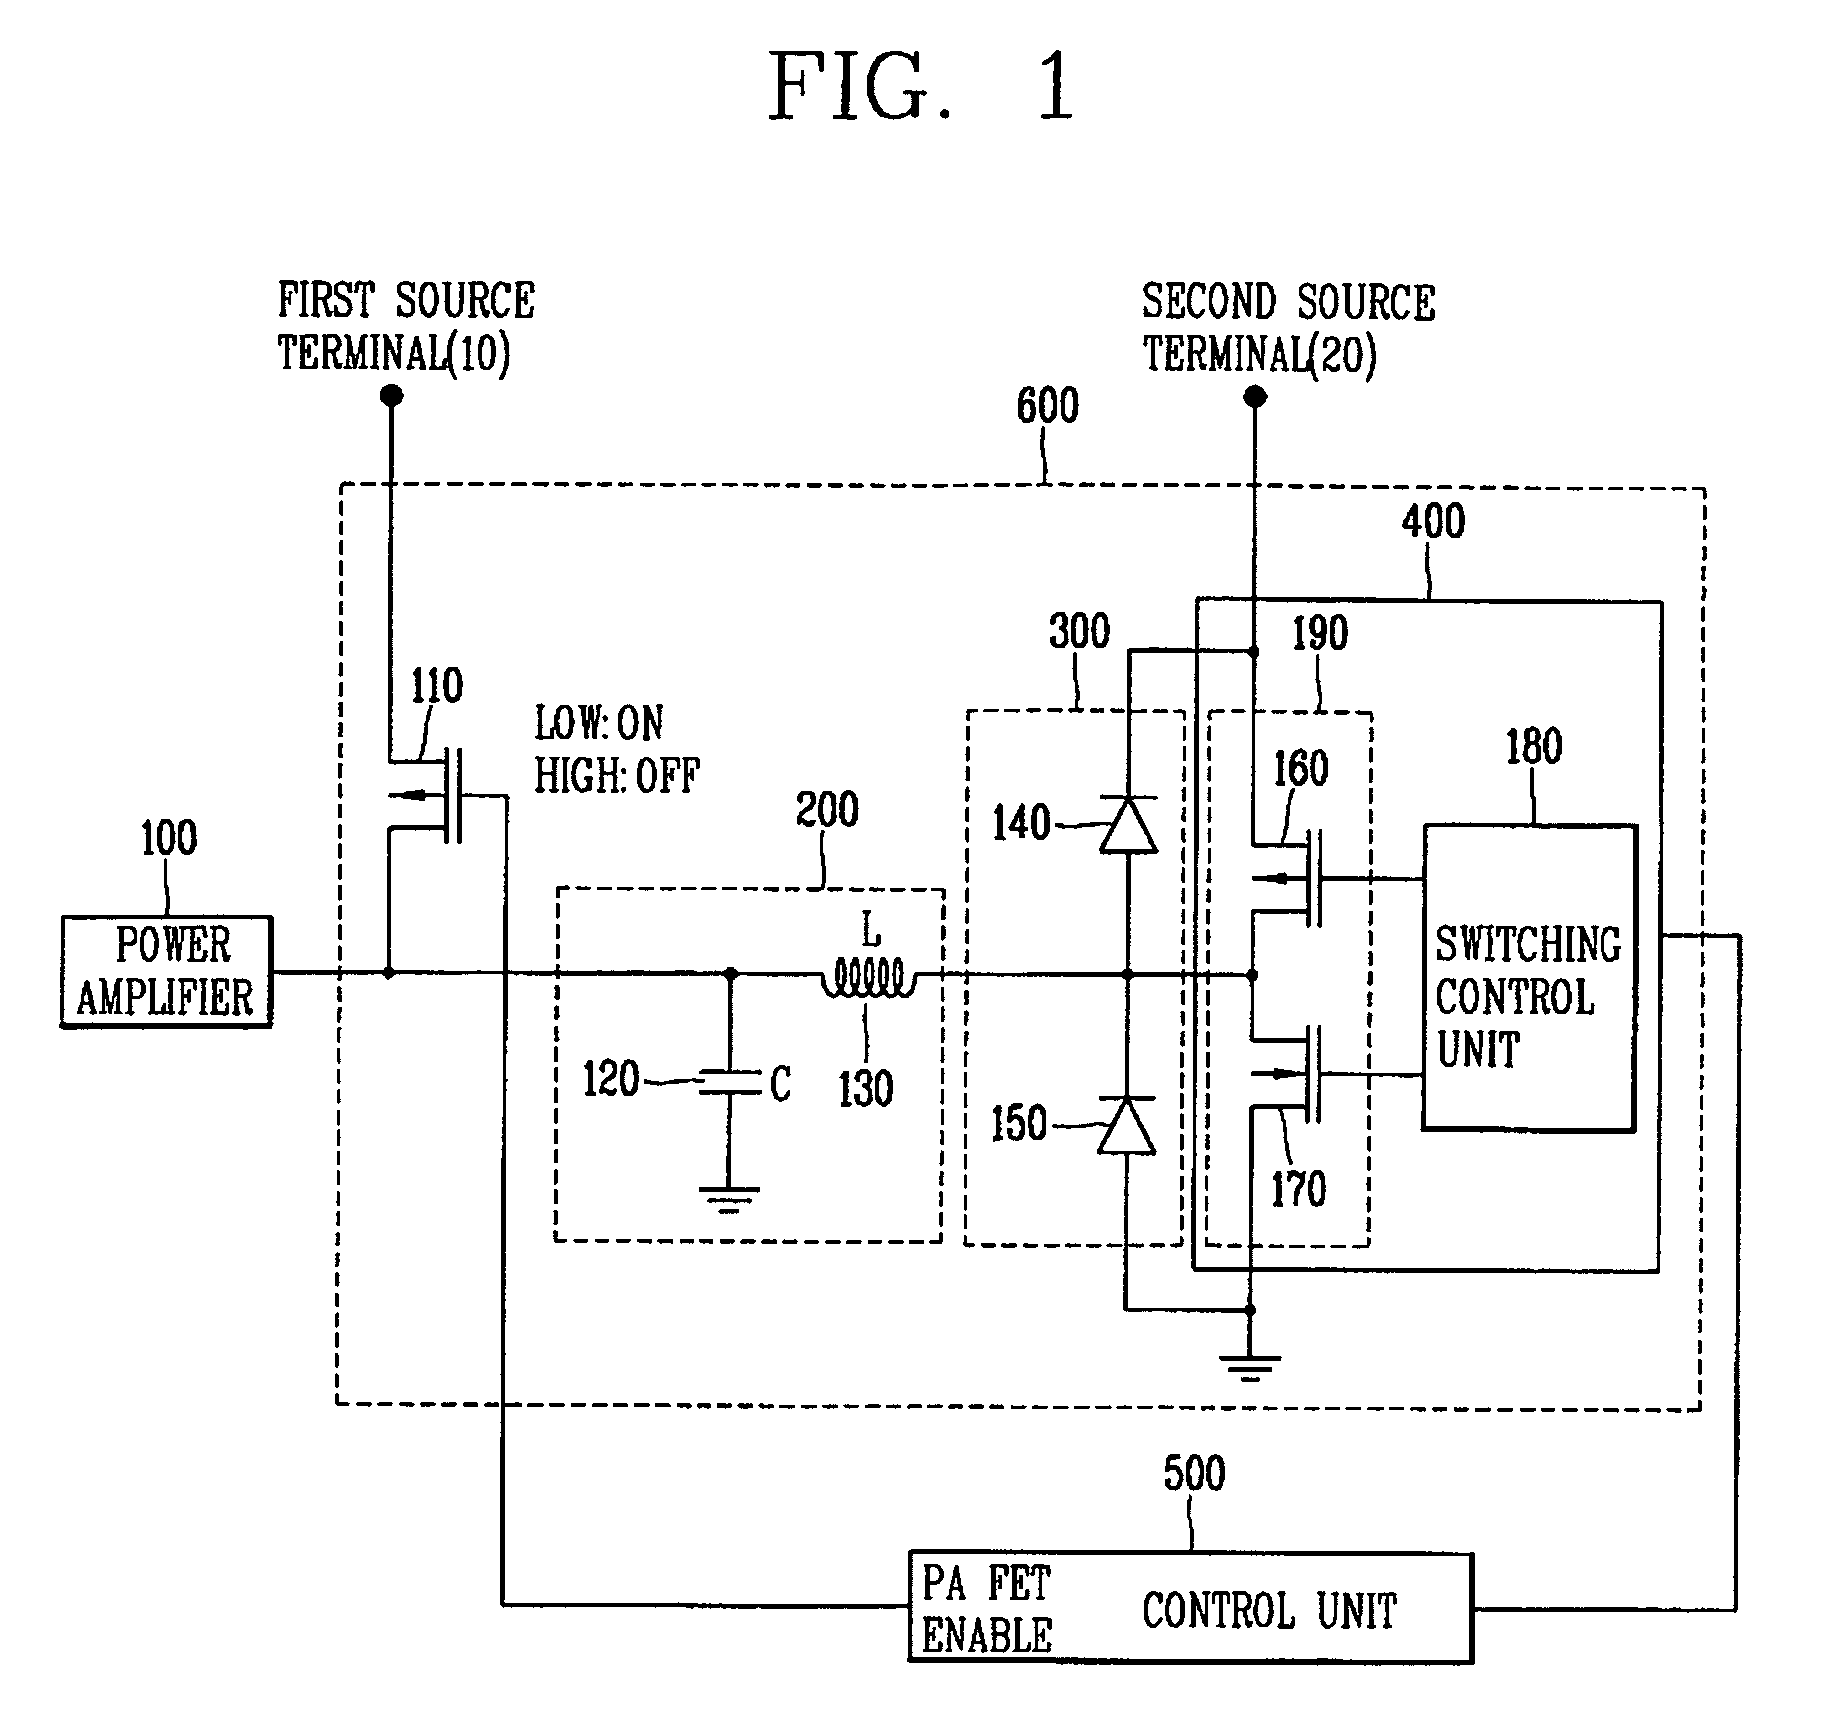 Power protecting apparatus and method for power amplifier